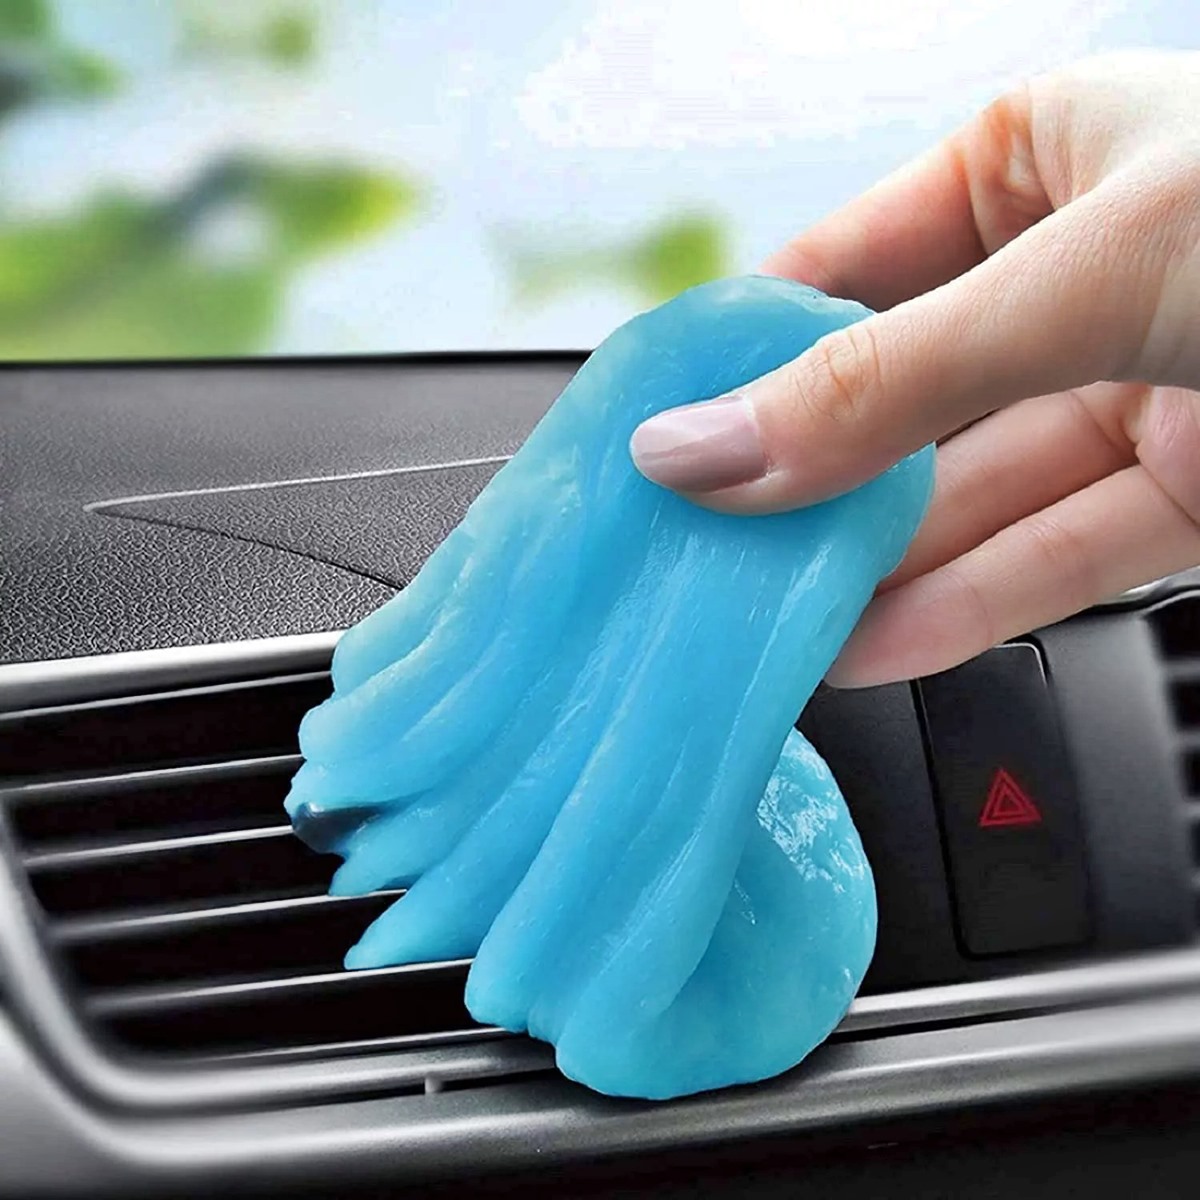 How To Make Car Cleaning Slime